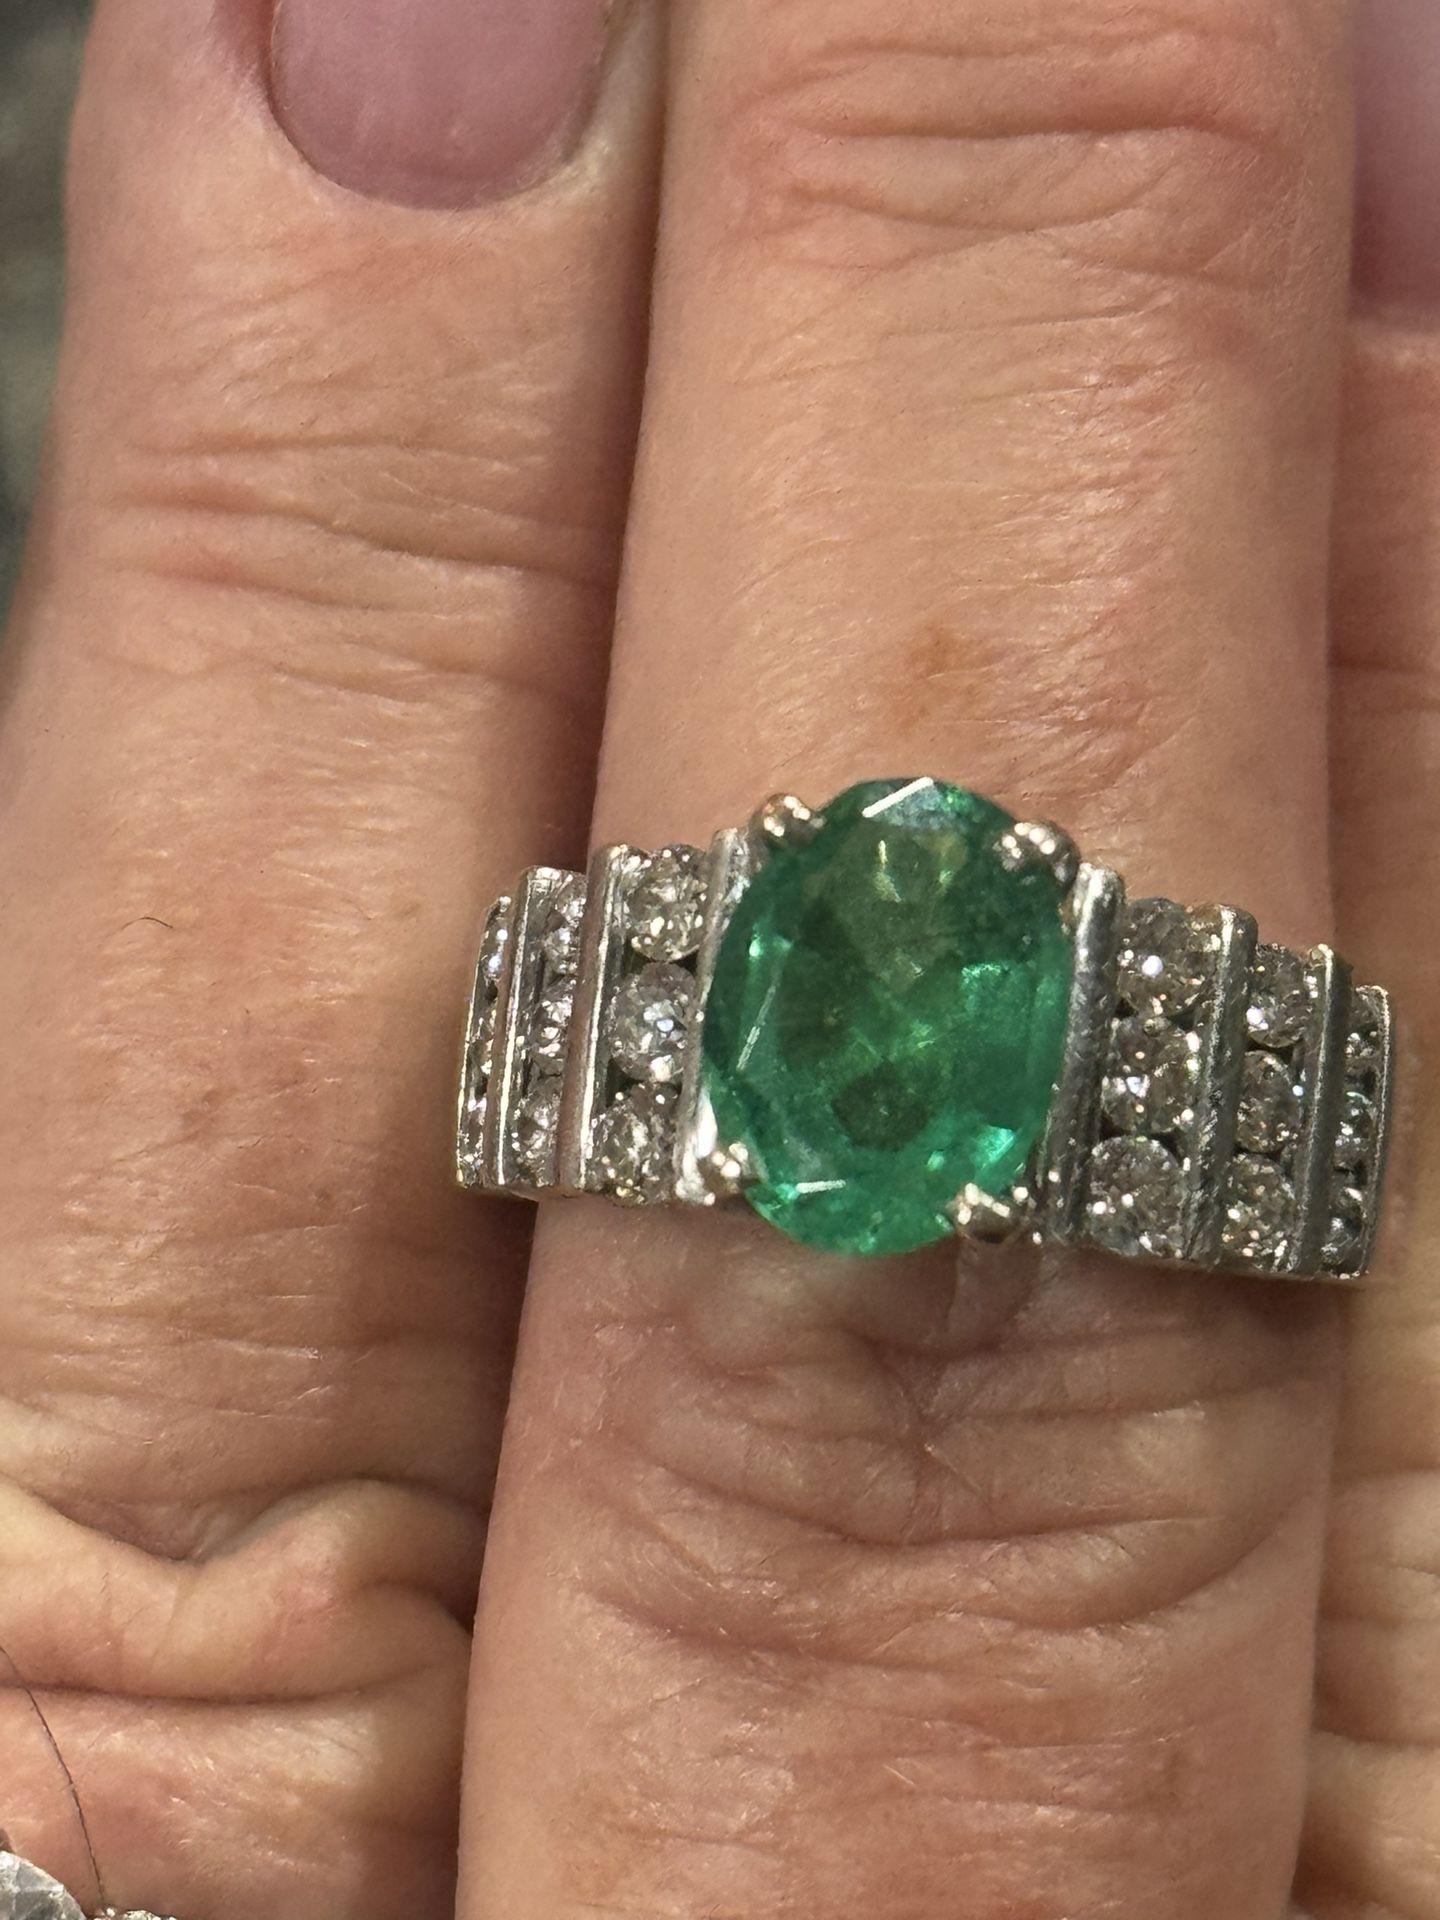 Authentic Diamond And Emerald Ring